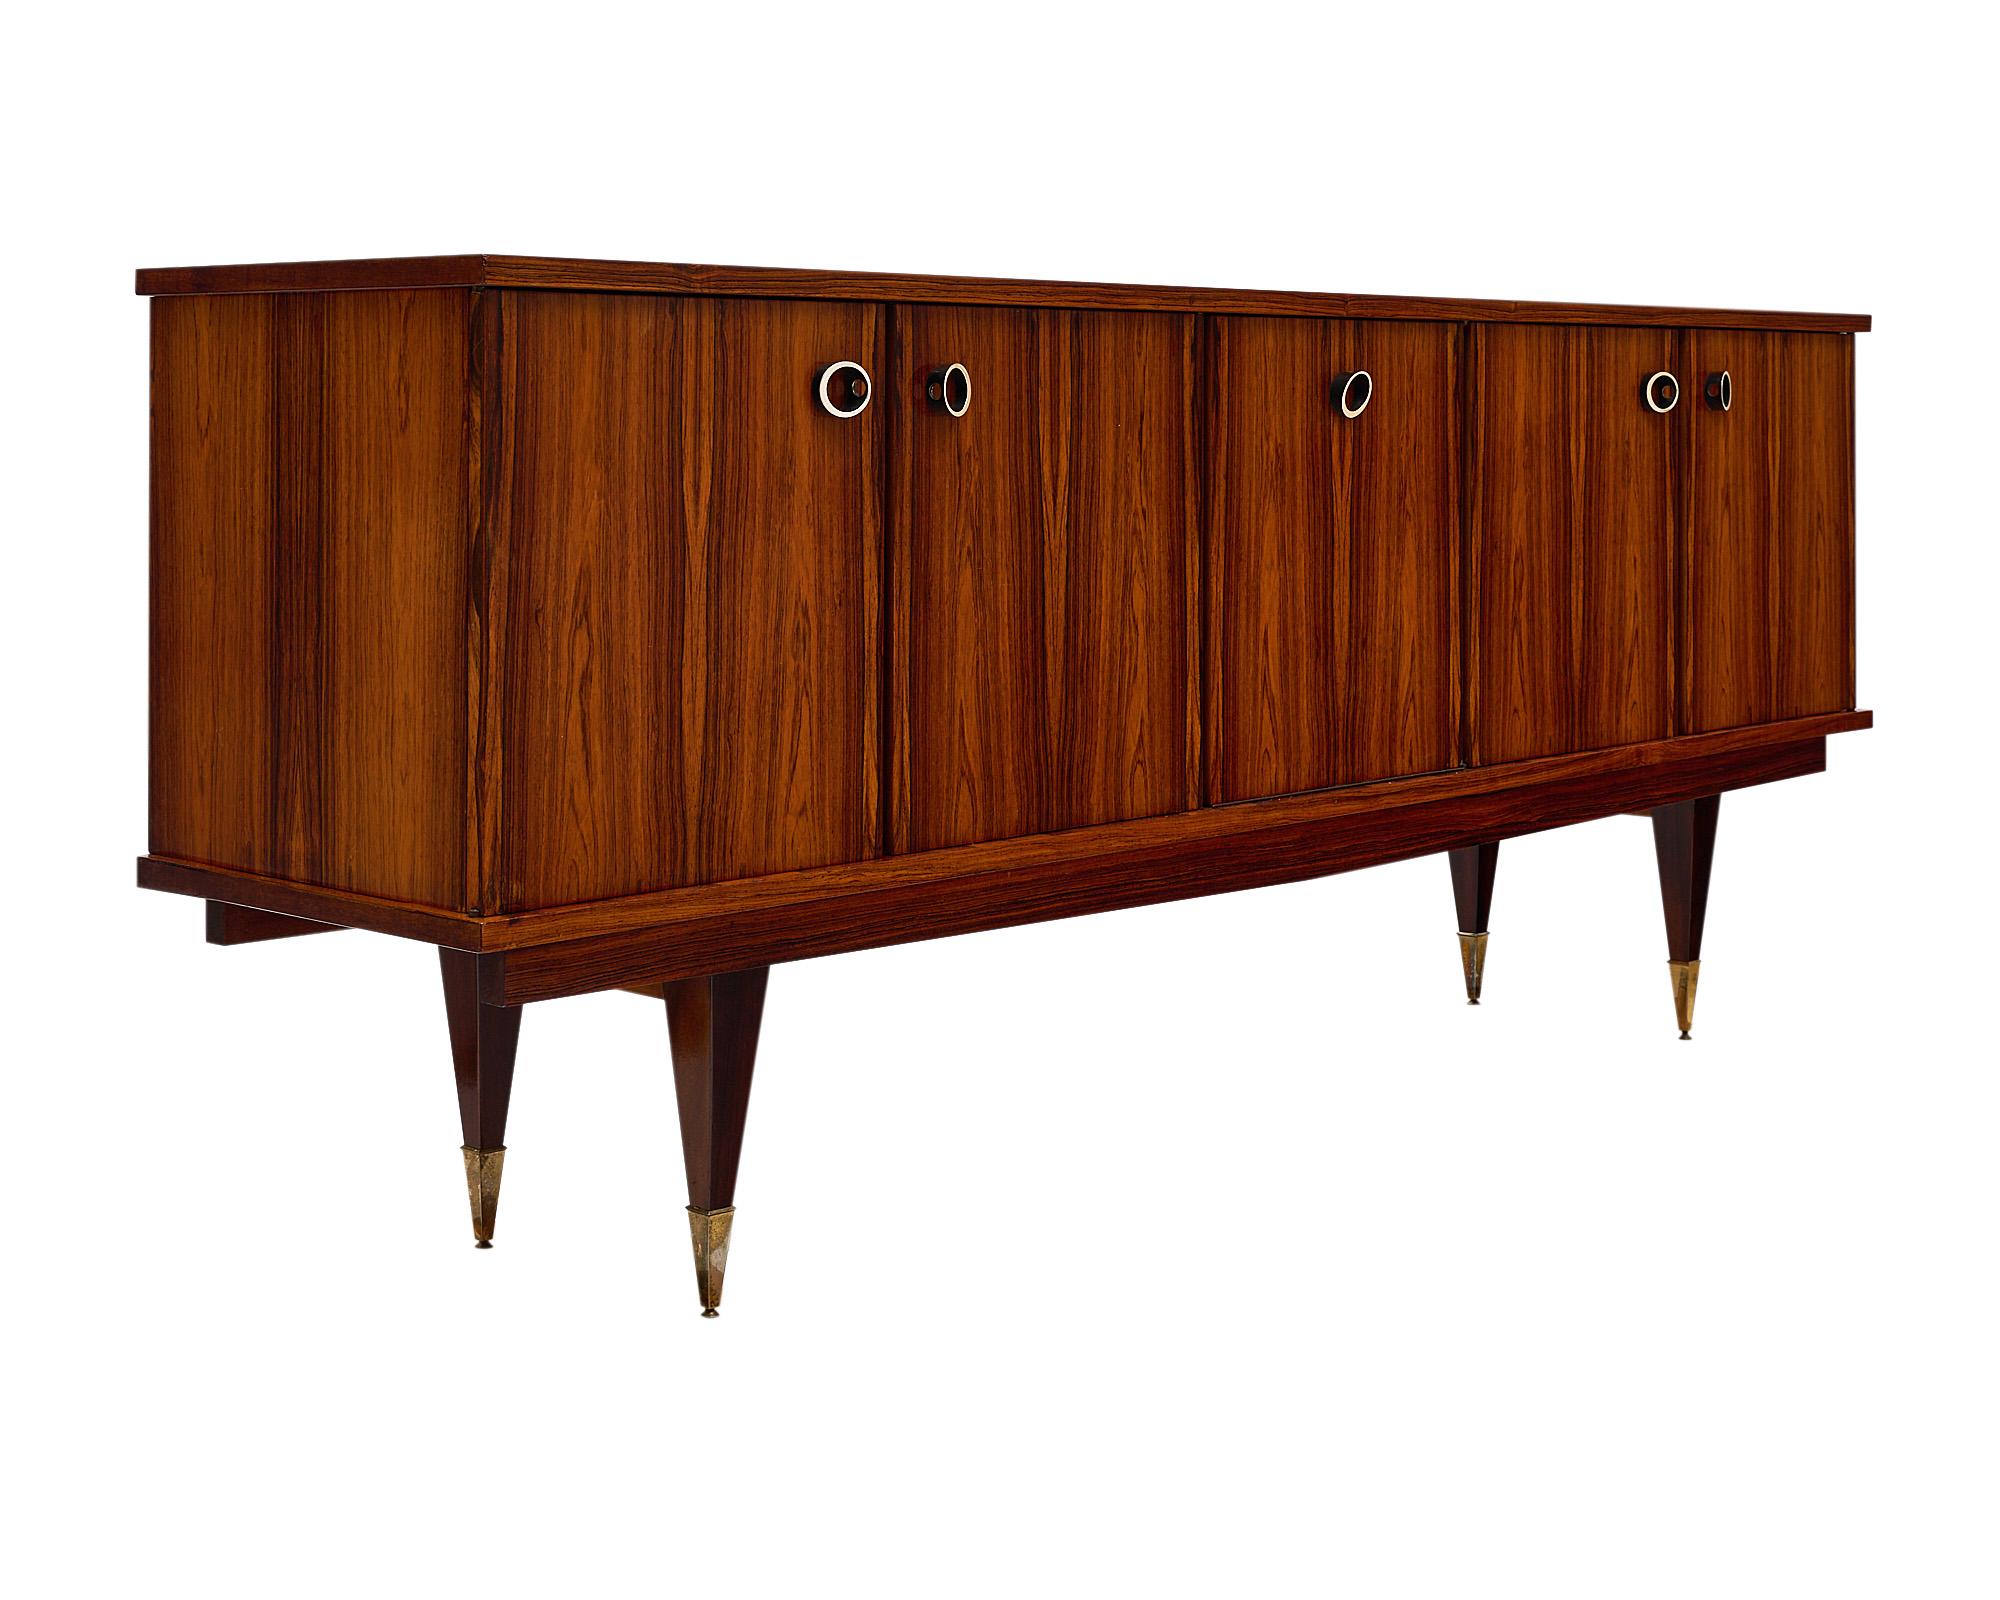 Mid-Century Modern French buffet/credenza made of solid Brazilian rosewood. This French sideboard features four cabinet doors and one drop front door opening to interior shelving and two wooden drawers for ample storage. The piece has been